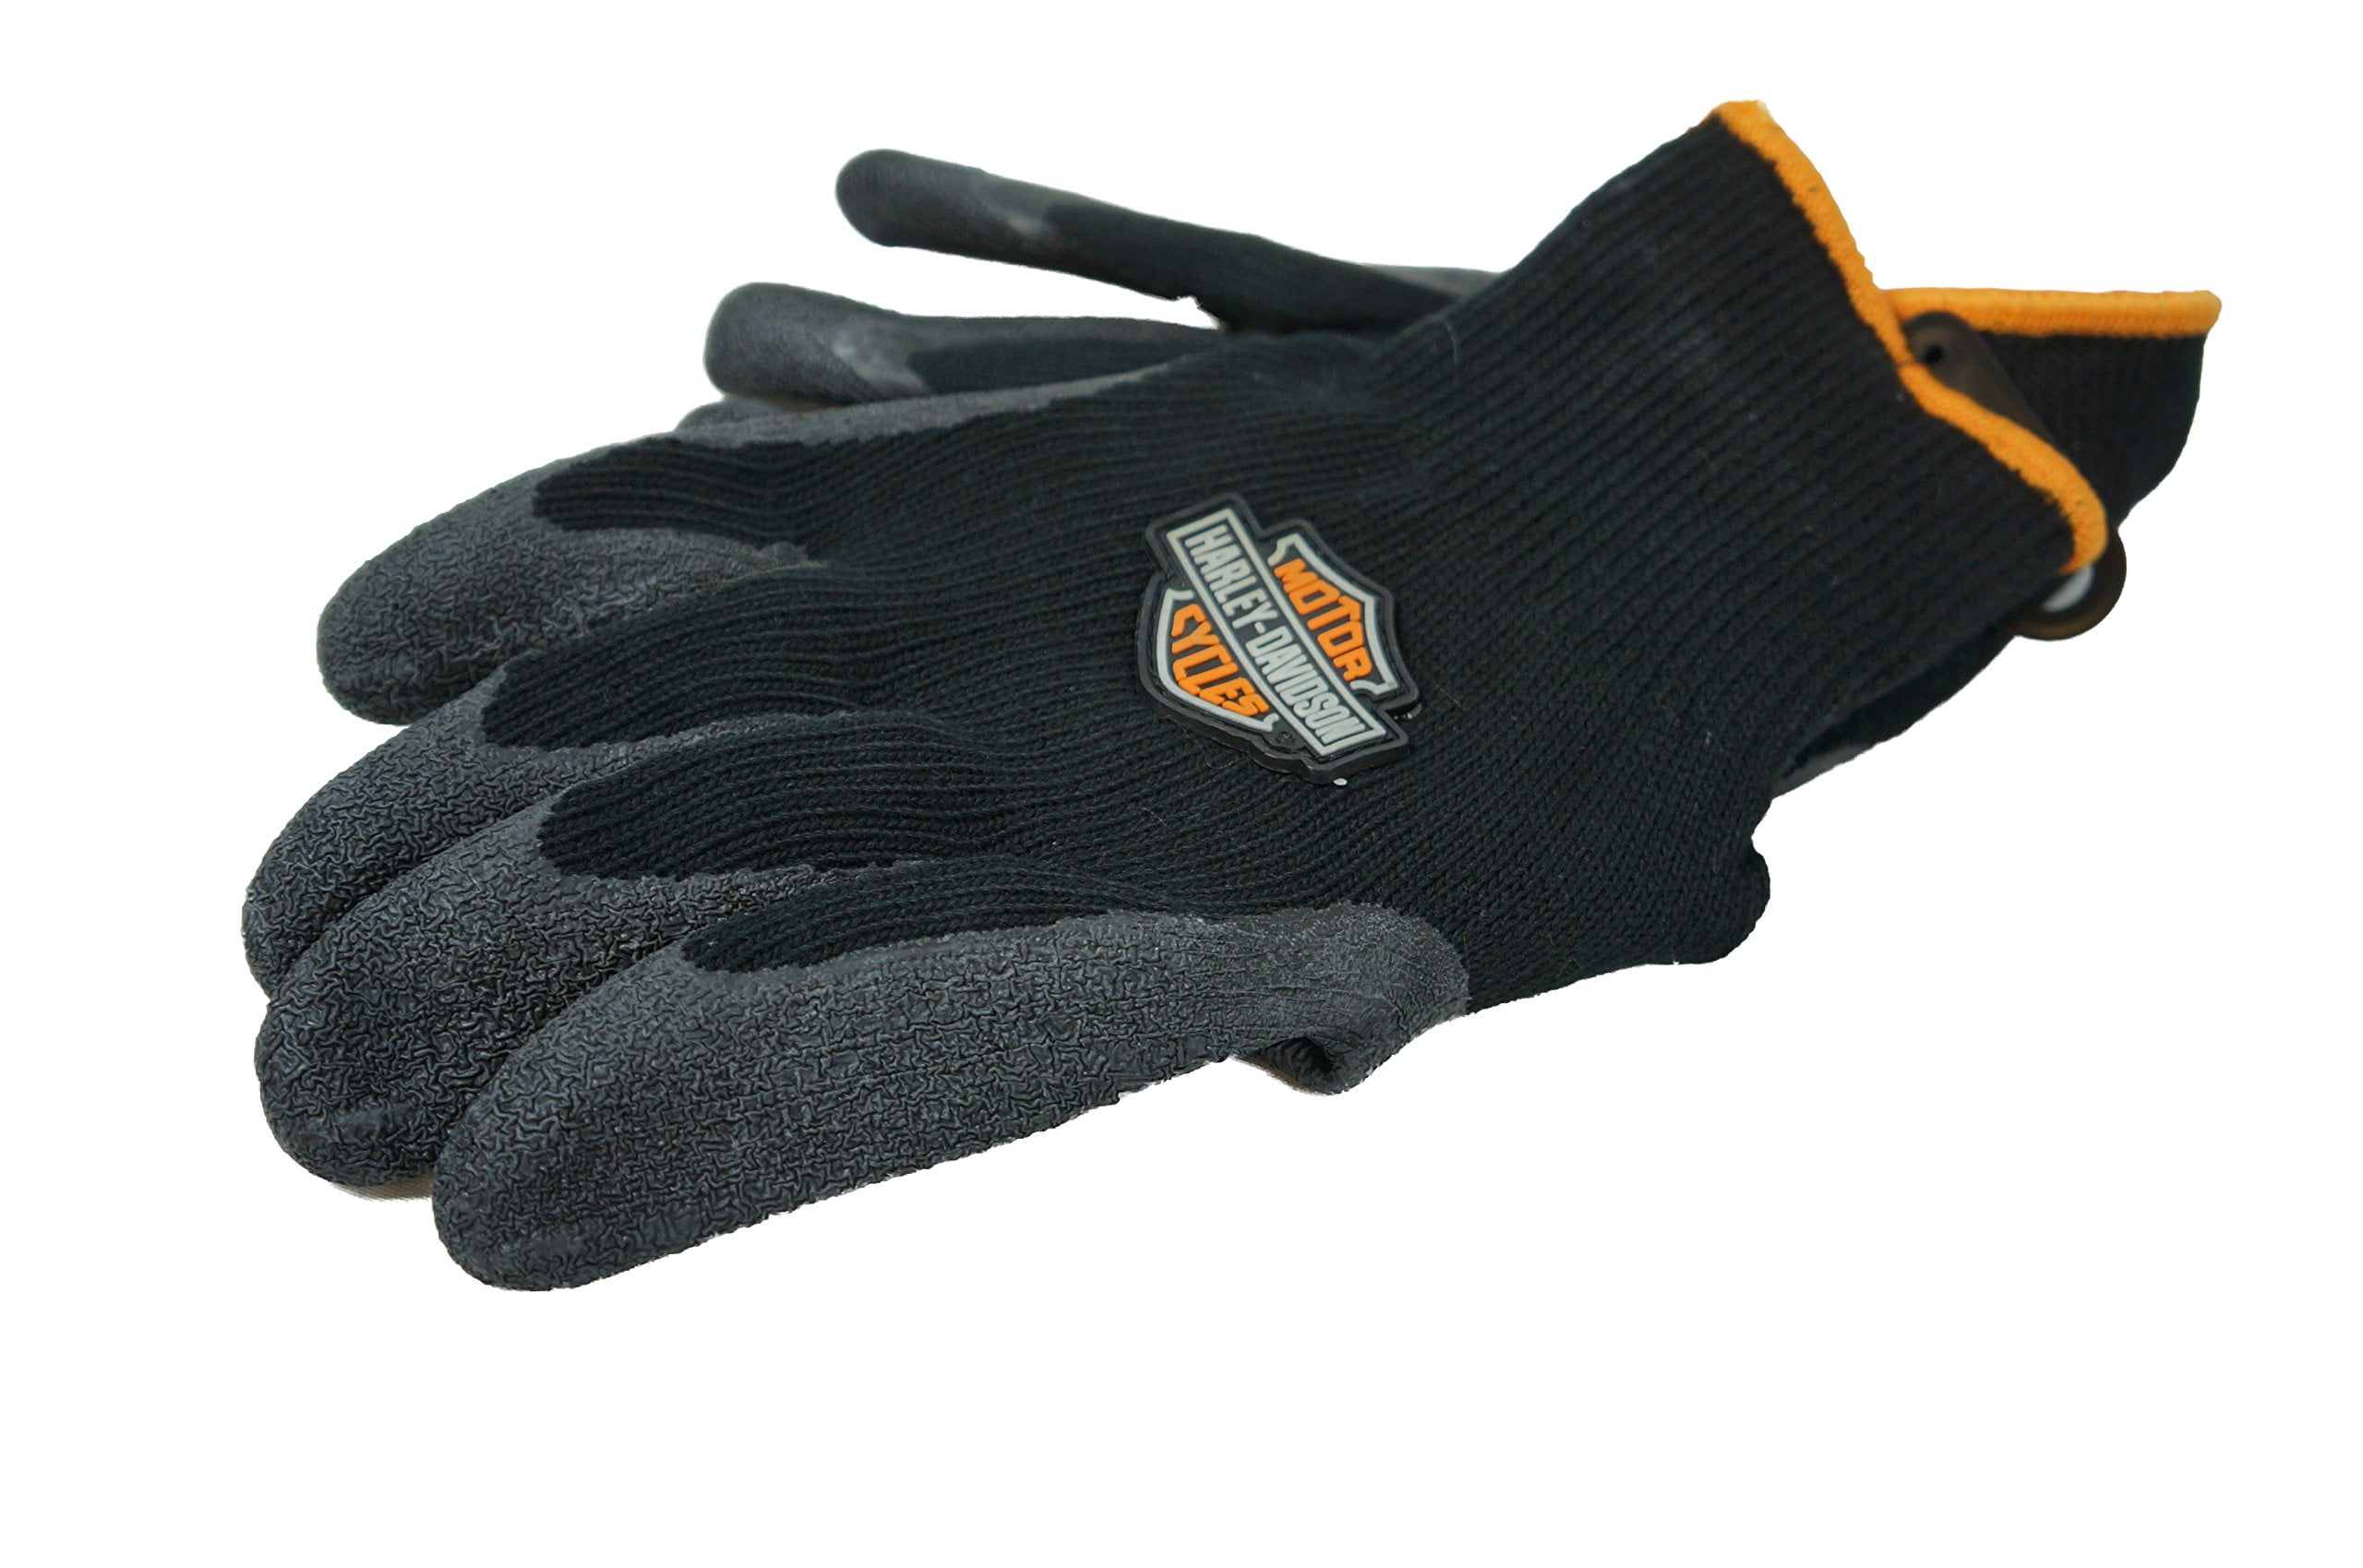 NEW Harley Davidson Rubber Coated Knit Grip Gloves Riders Winter Size Large 